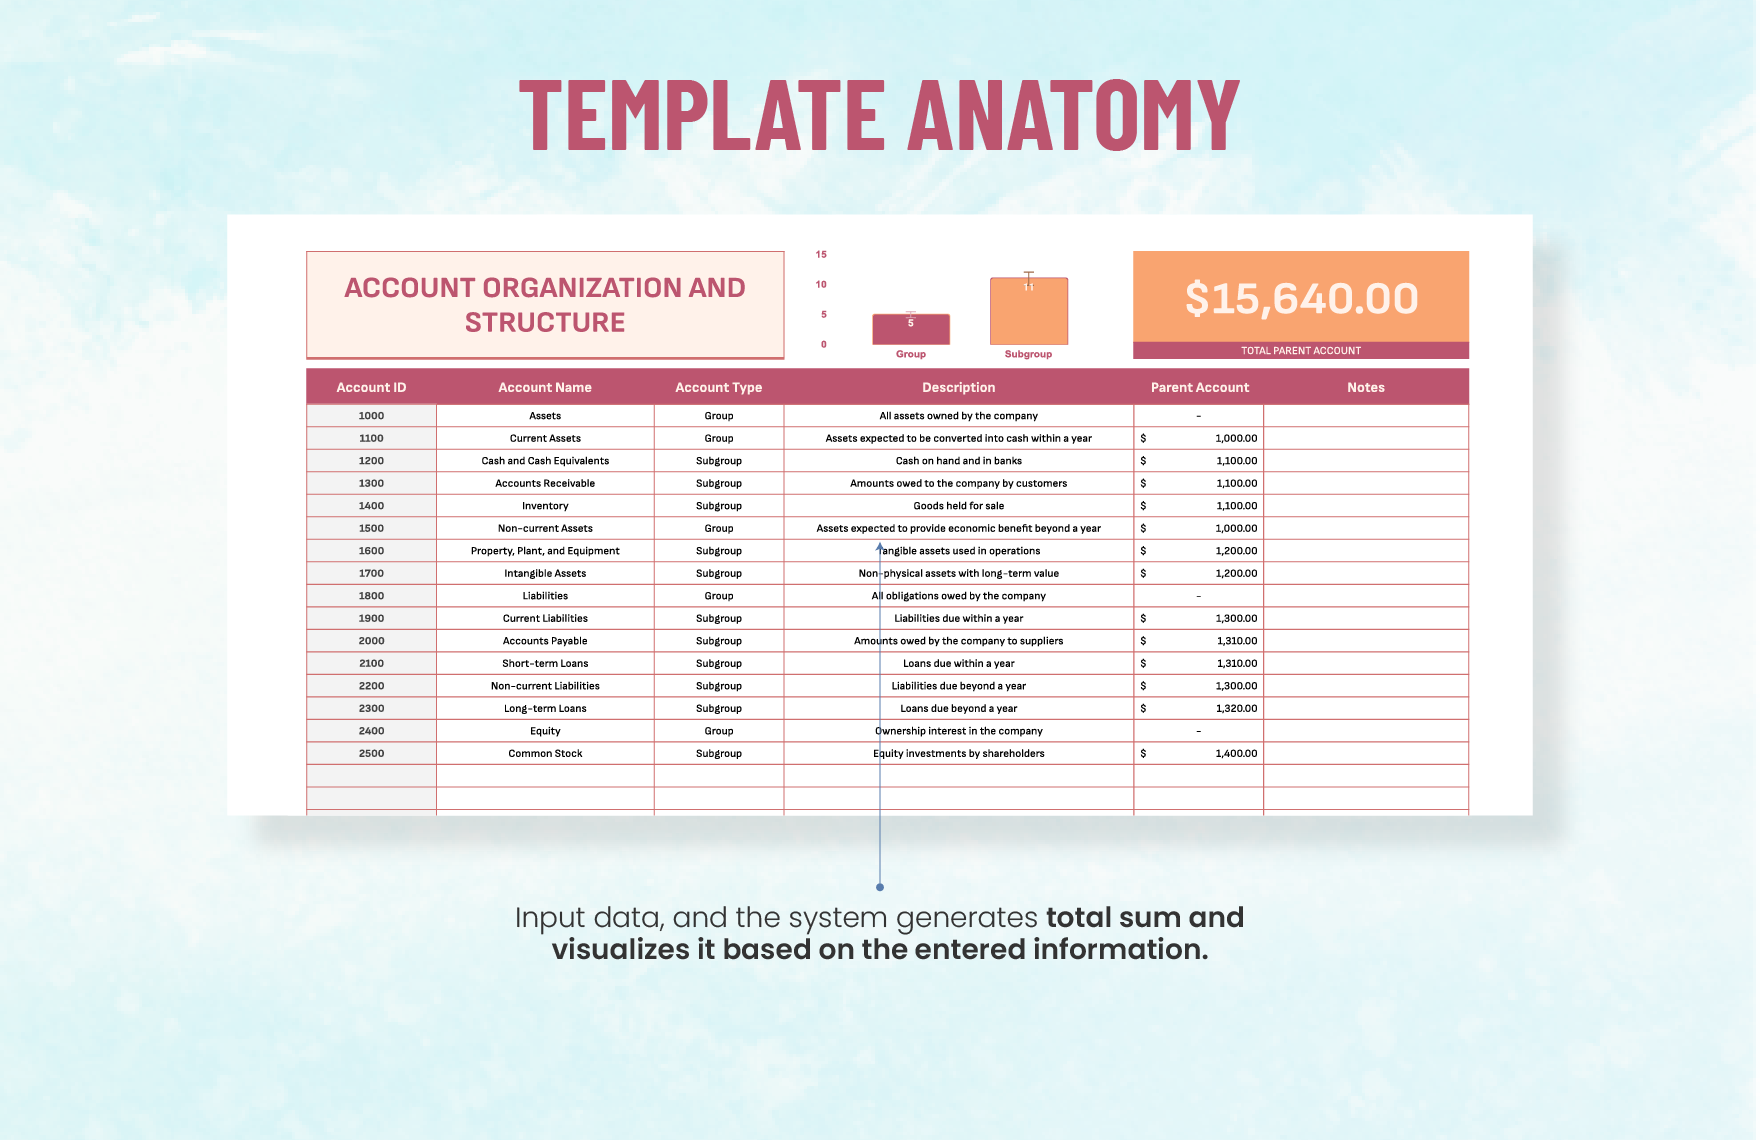 Account Organization and Structure Template